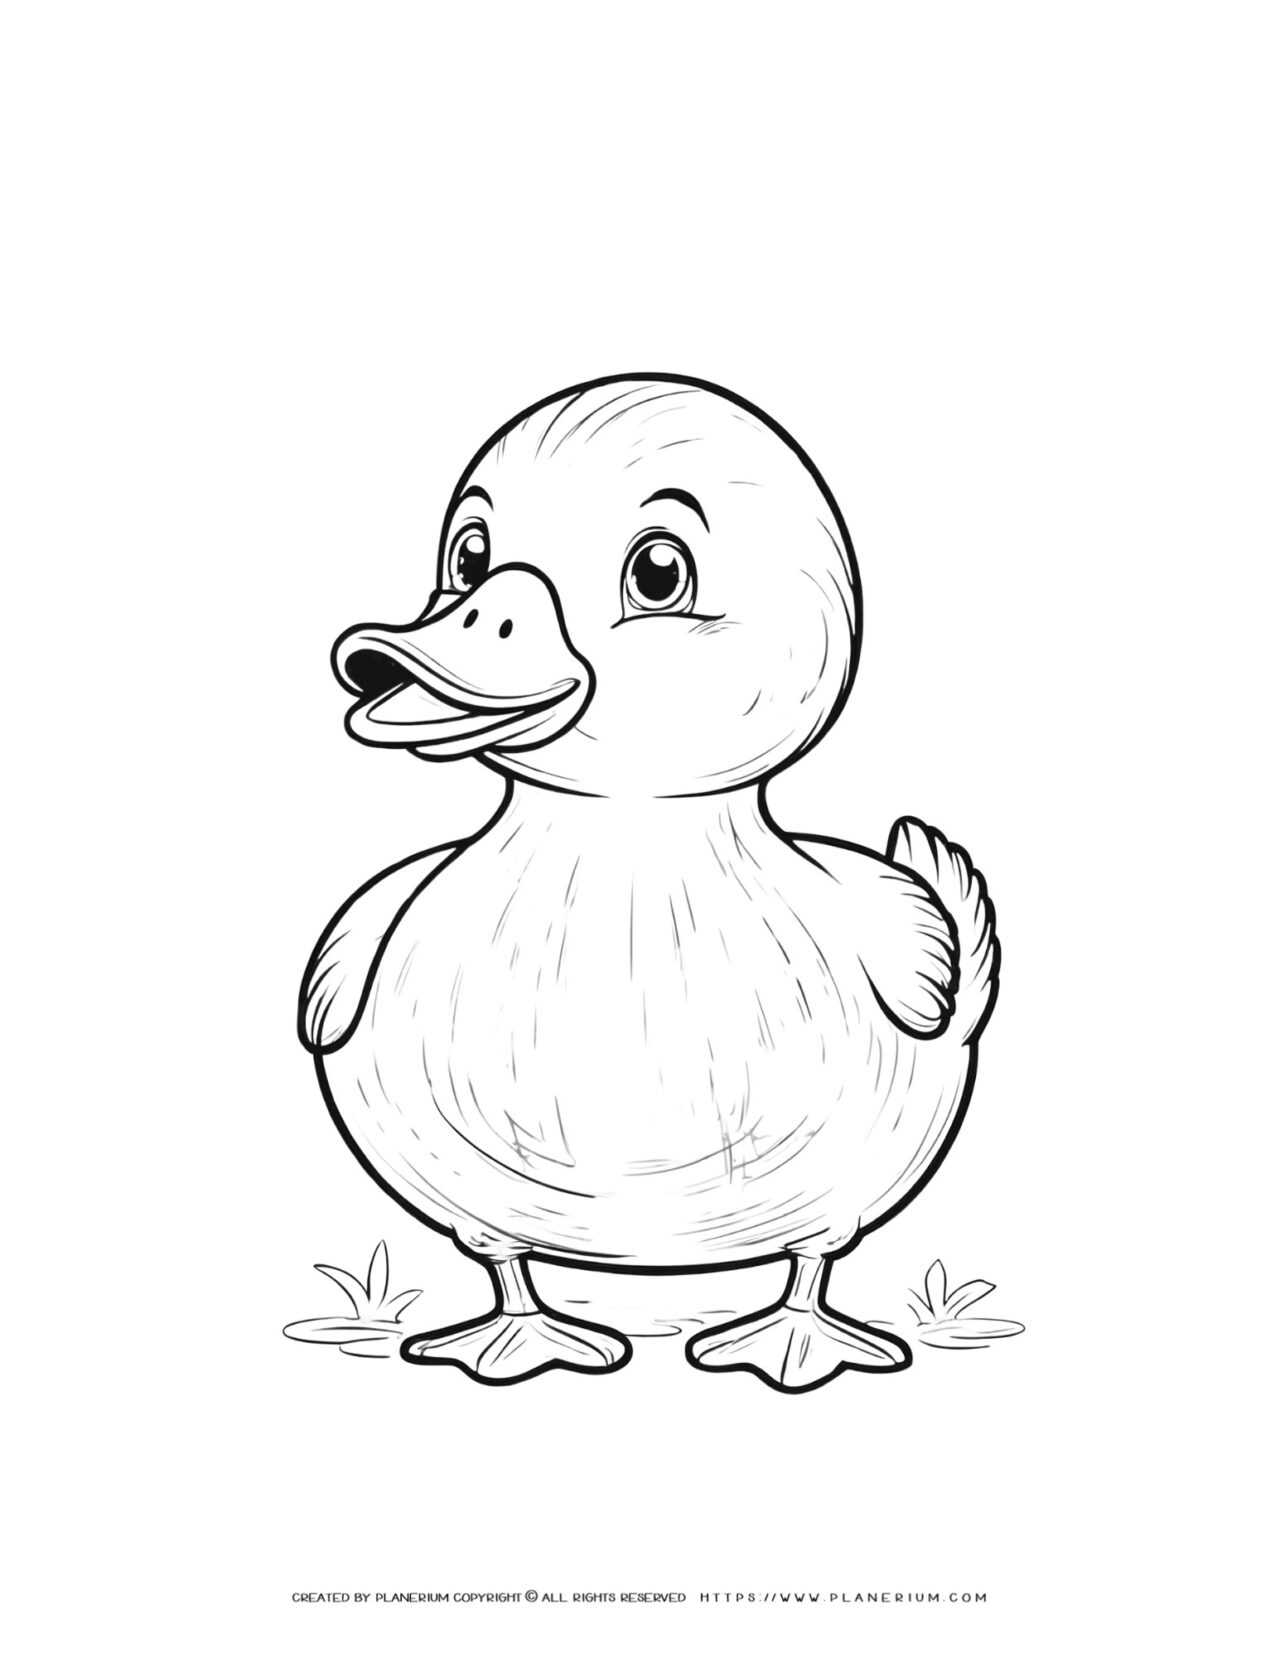 Cute-Duckling-Outline-Coloring-Page-for-Kids